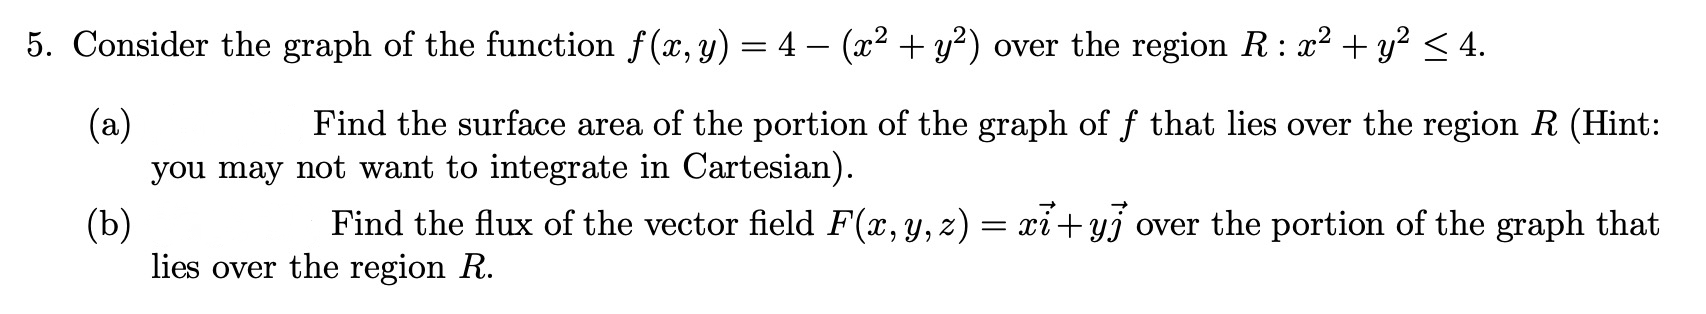 5. Consider the graph of the function f(x, y) = 4 – (x² + y²) over the region R: x² + y² < 4.
(a)
you may not want to integrate in Cartesian).
Find the surface area of the portion of the graph of f that lies over the region R (Hint:
Find the flux of the vector field F(x, y, z) = xi+yj over the portion of the graph that
(b)
lies over the region R.
